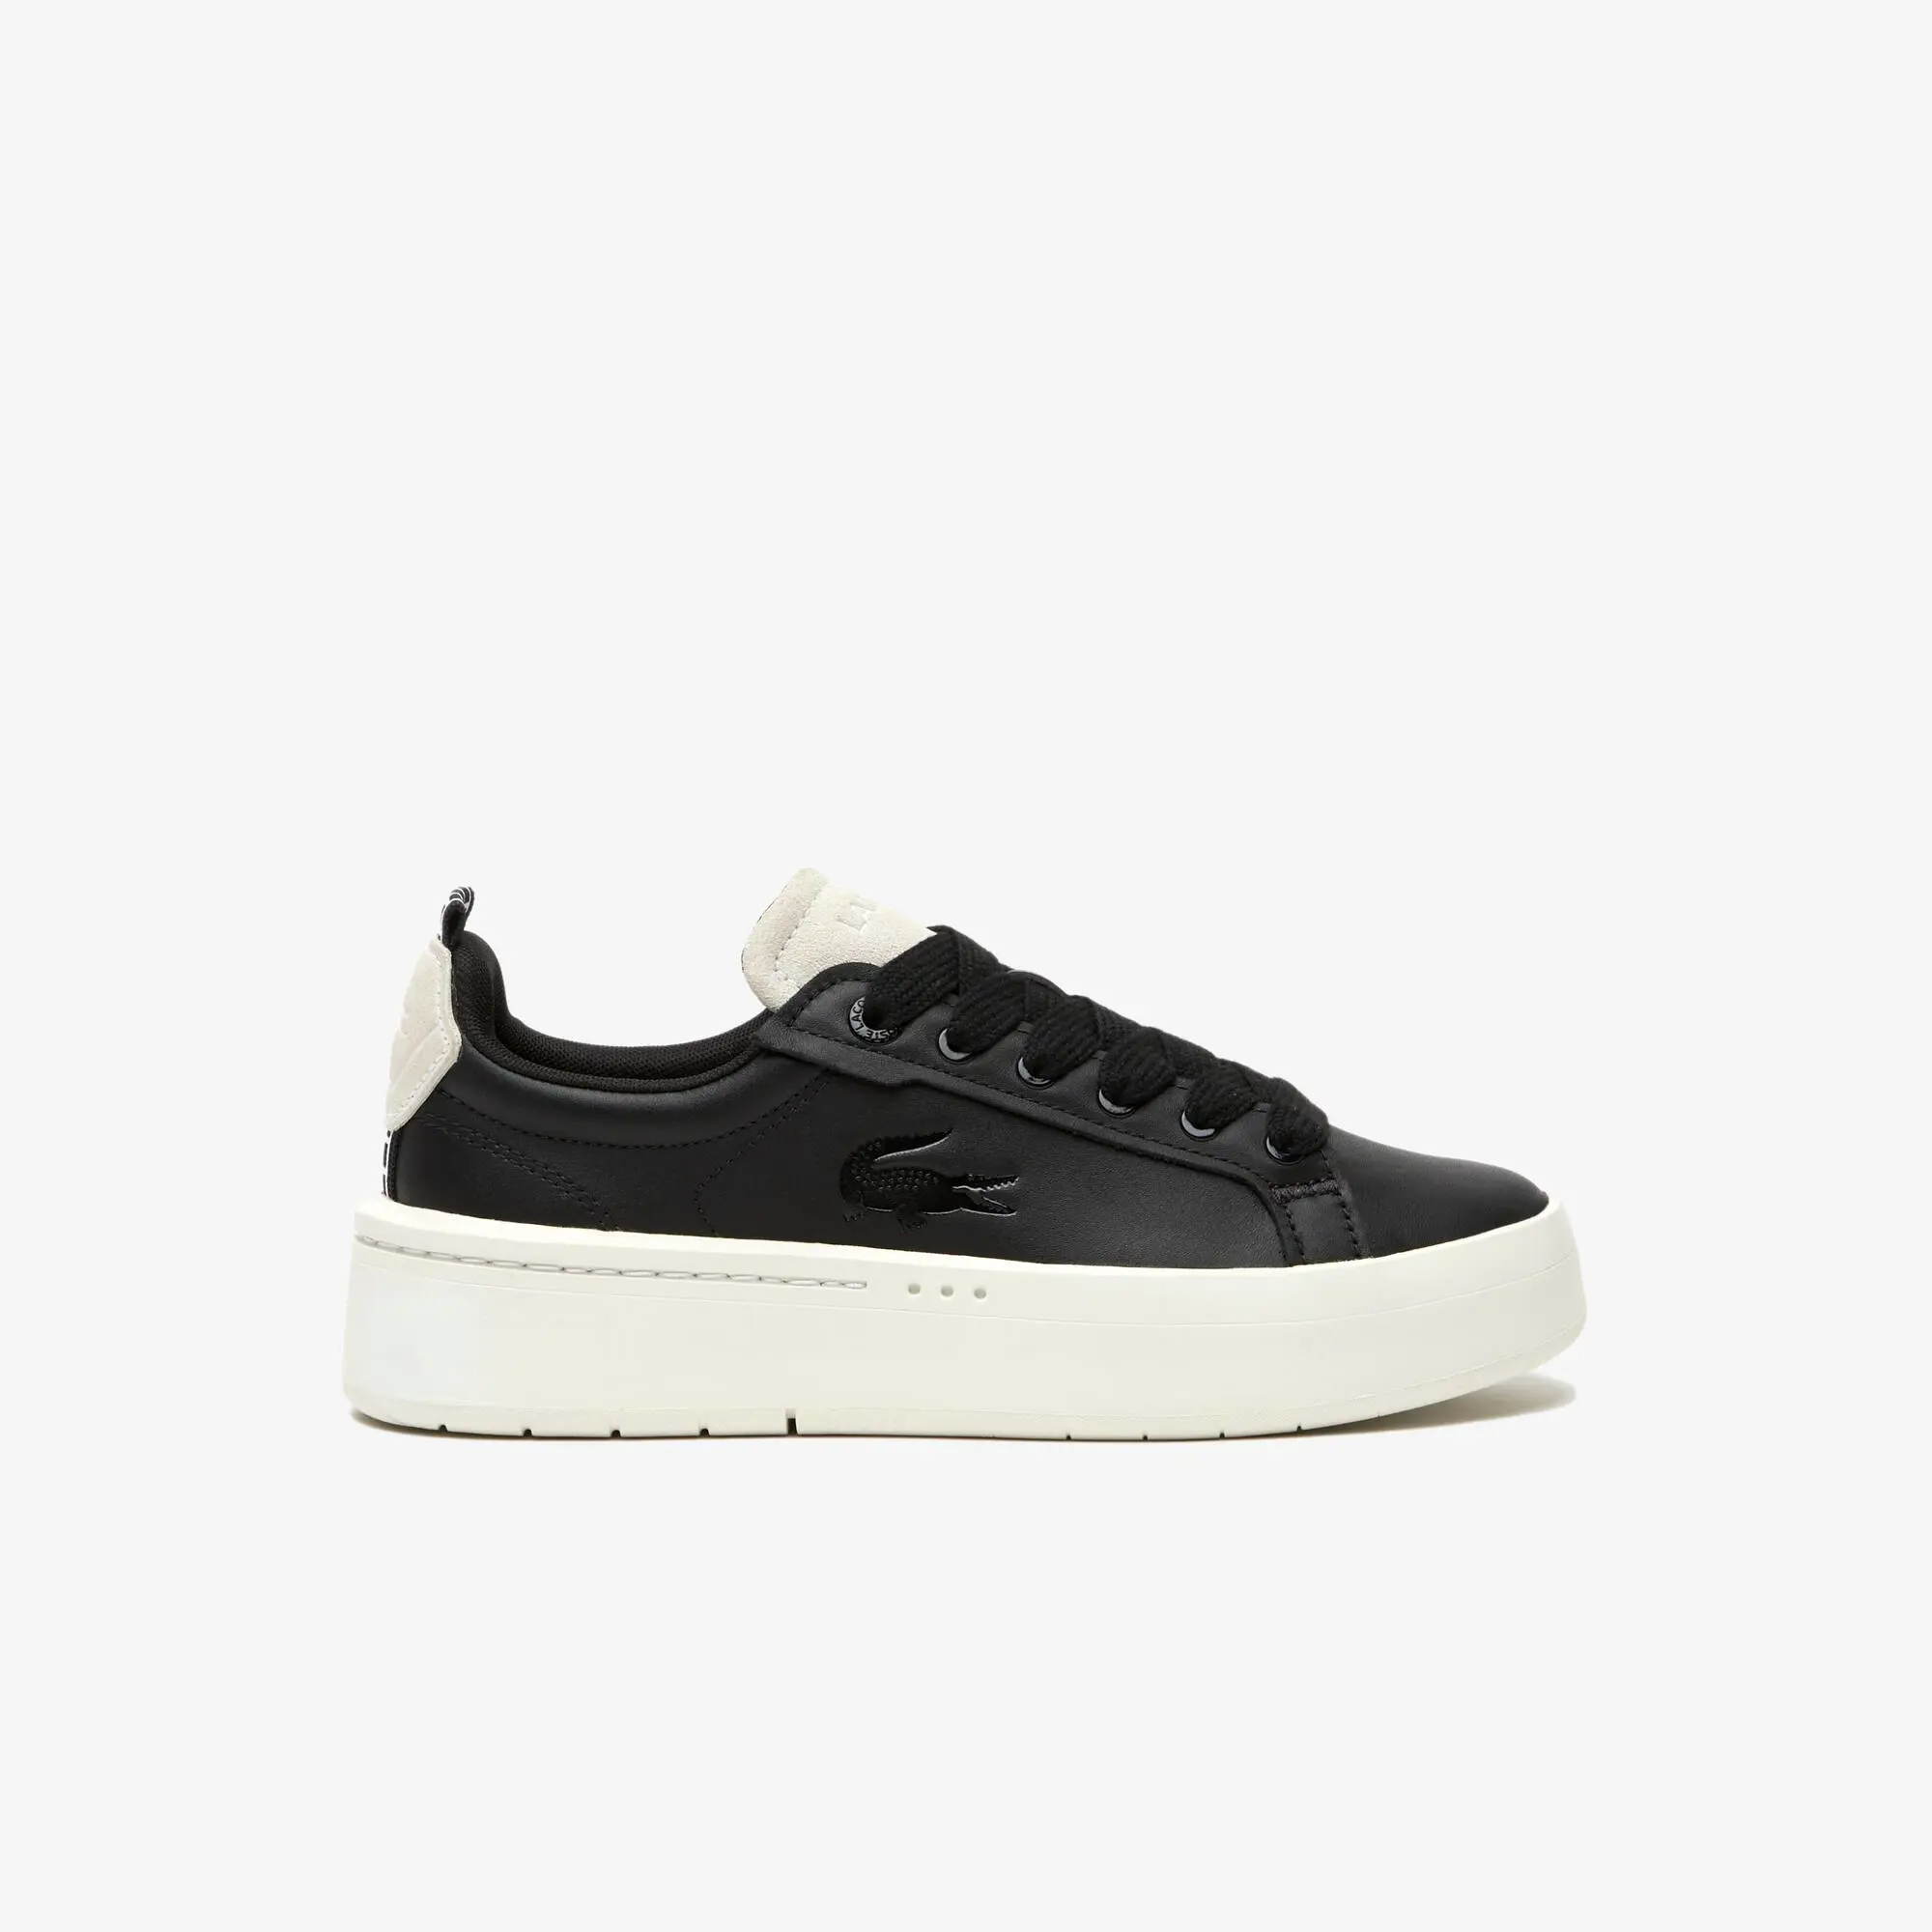 Lacoste Women's Lacoste Carnaby Platform Leather Trainers. 1